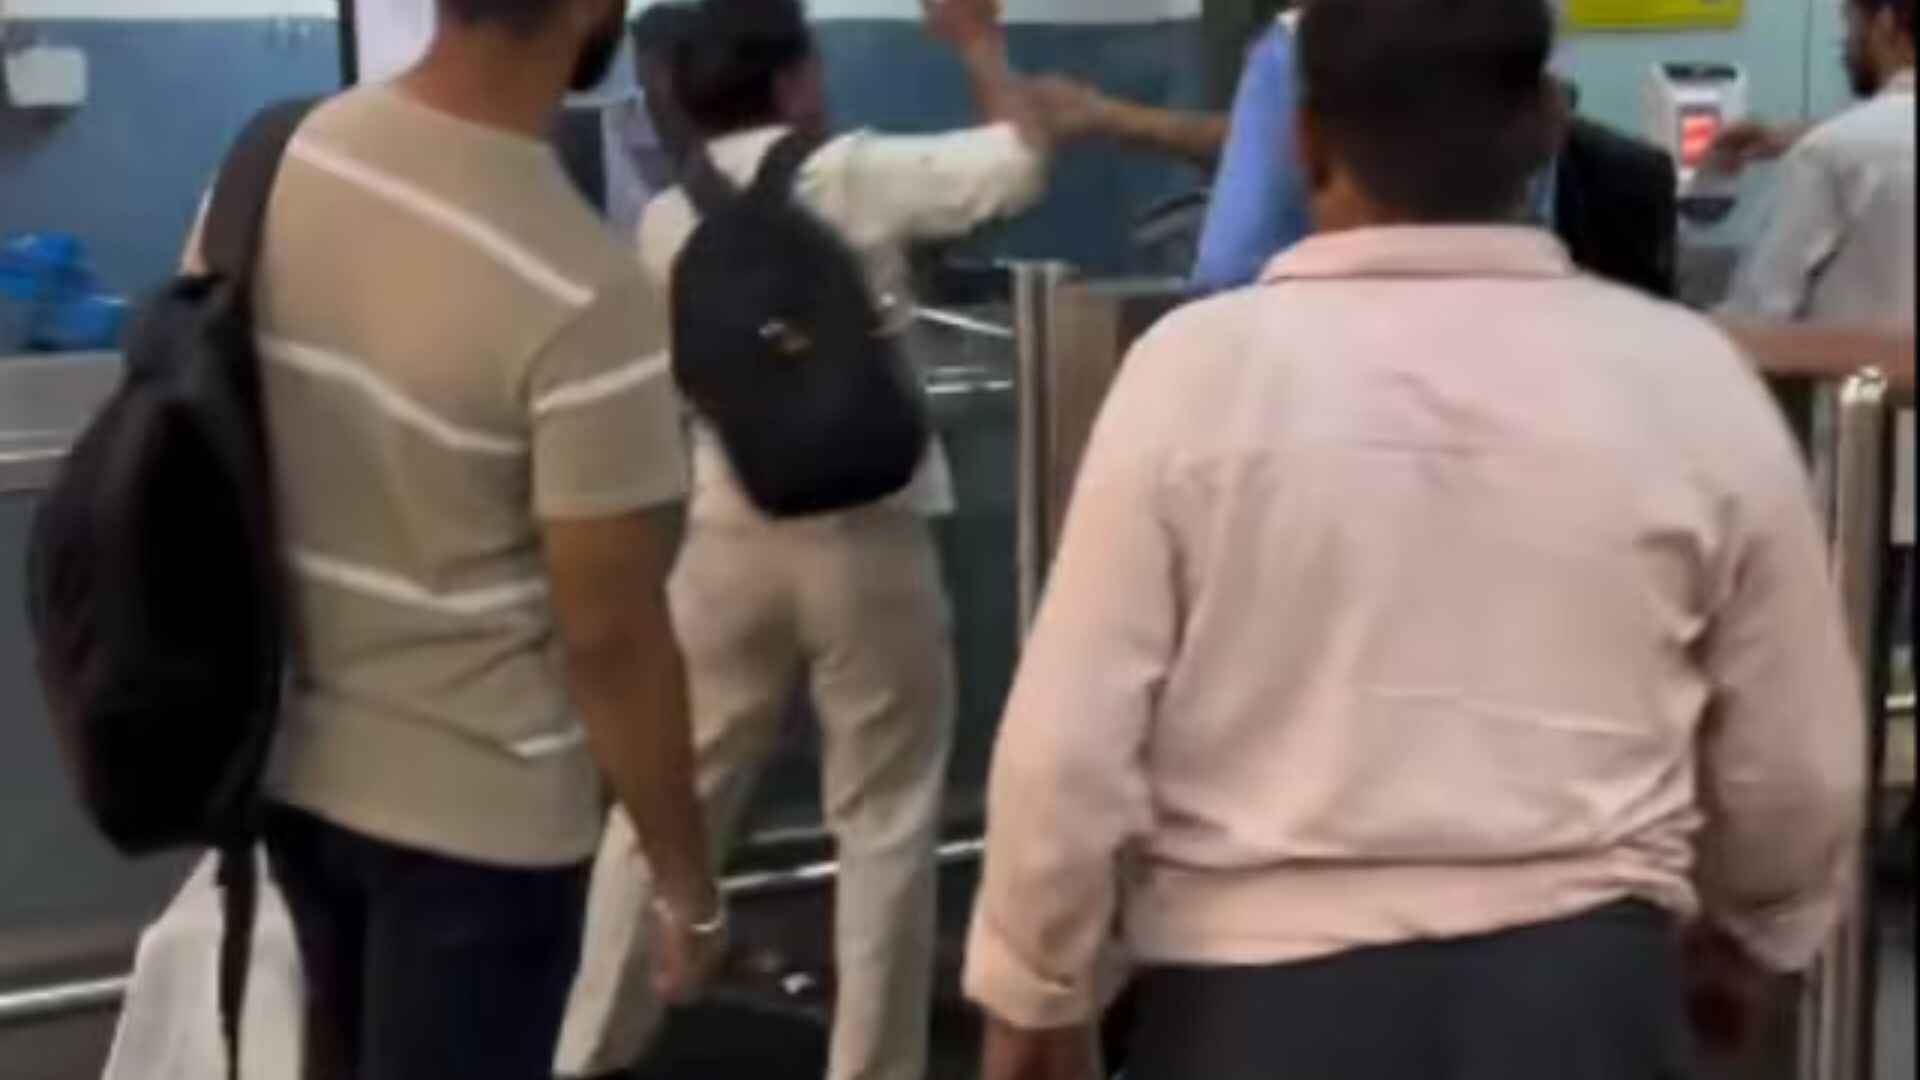 Watch: Good Samaritan Gets Slapped While Trying To Break Up Fight In Delhi Metro